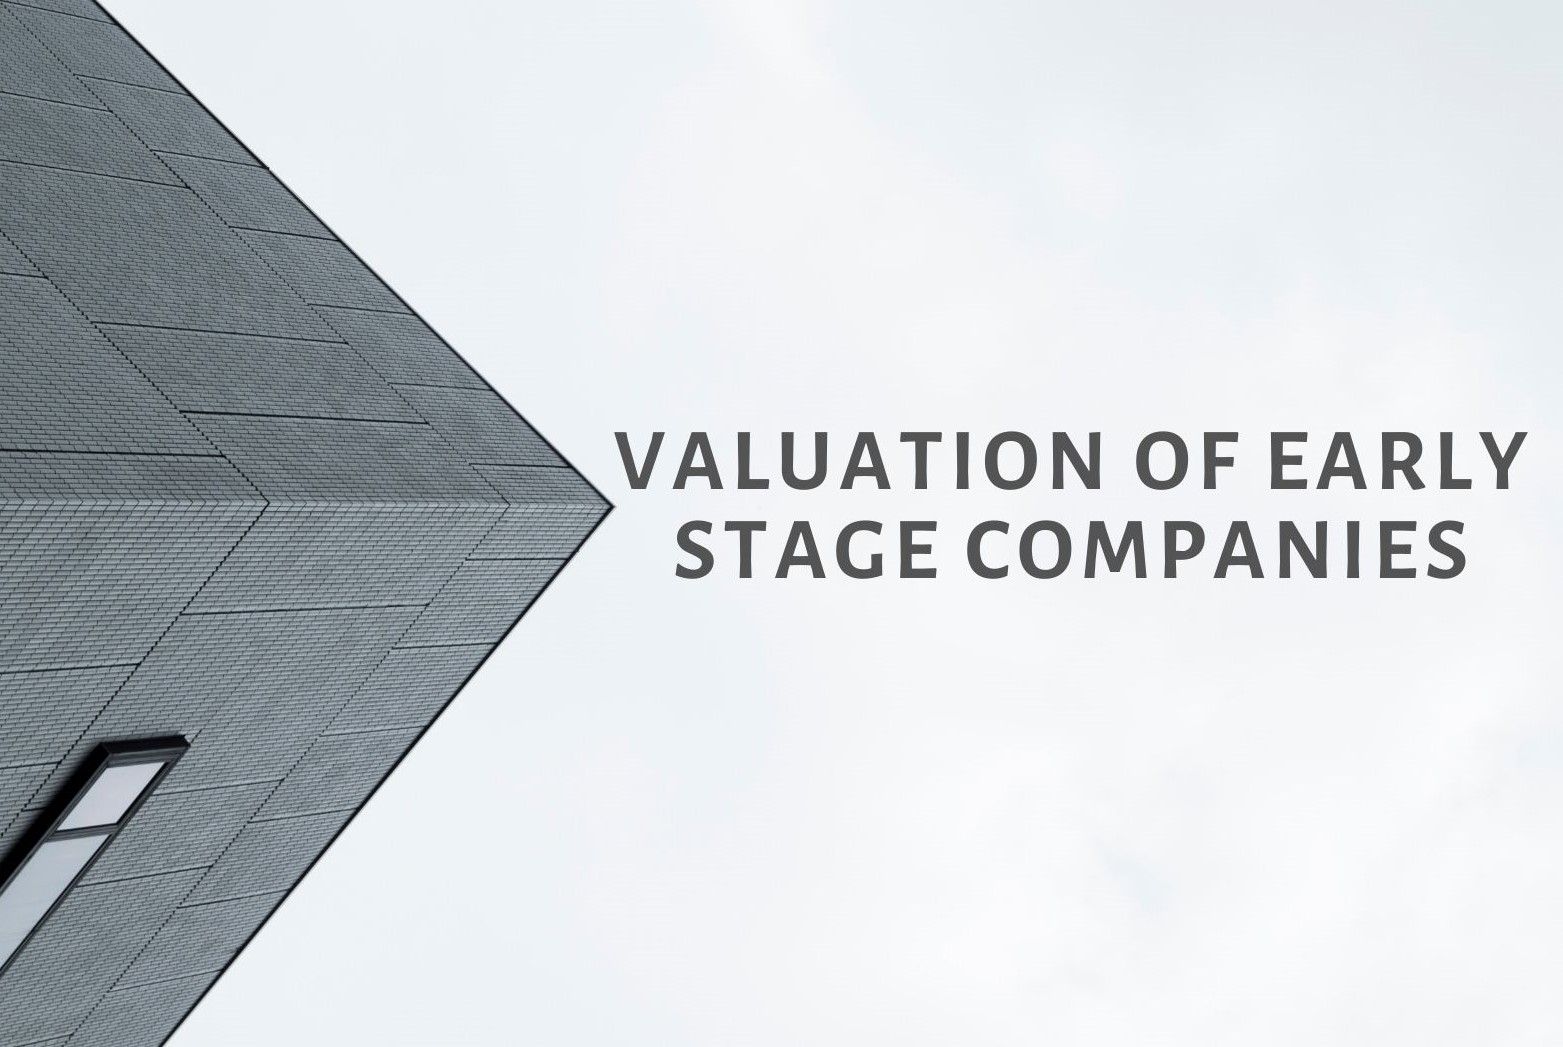 VALUATION OF EARLY STAGE COMPANIES 2